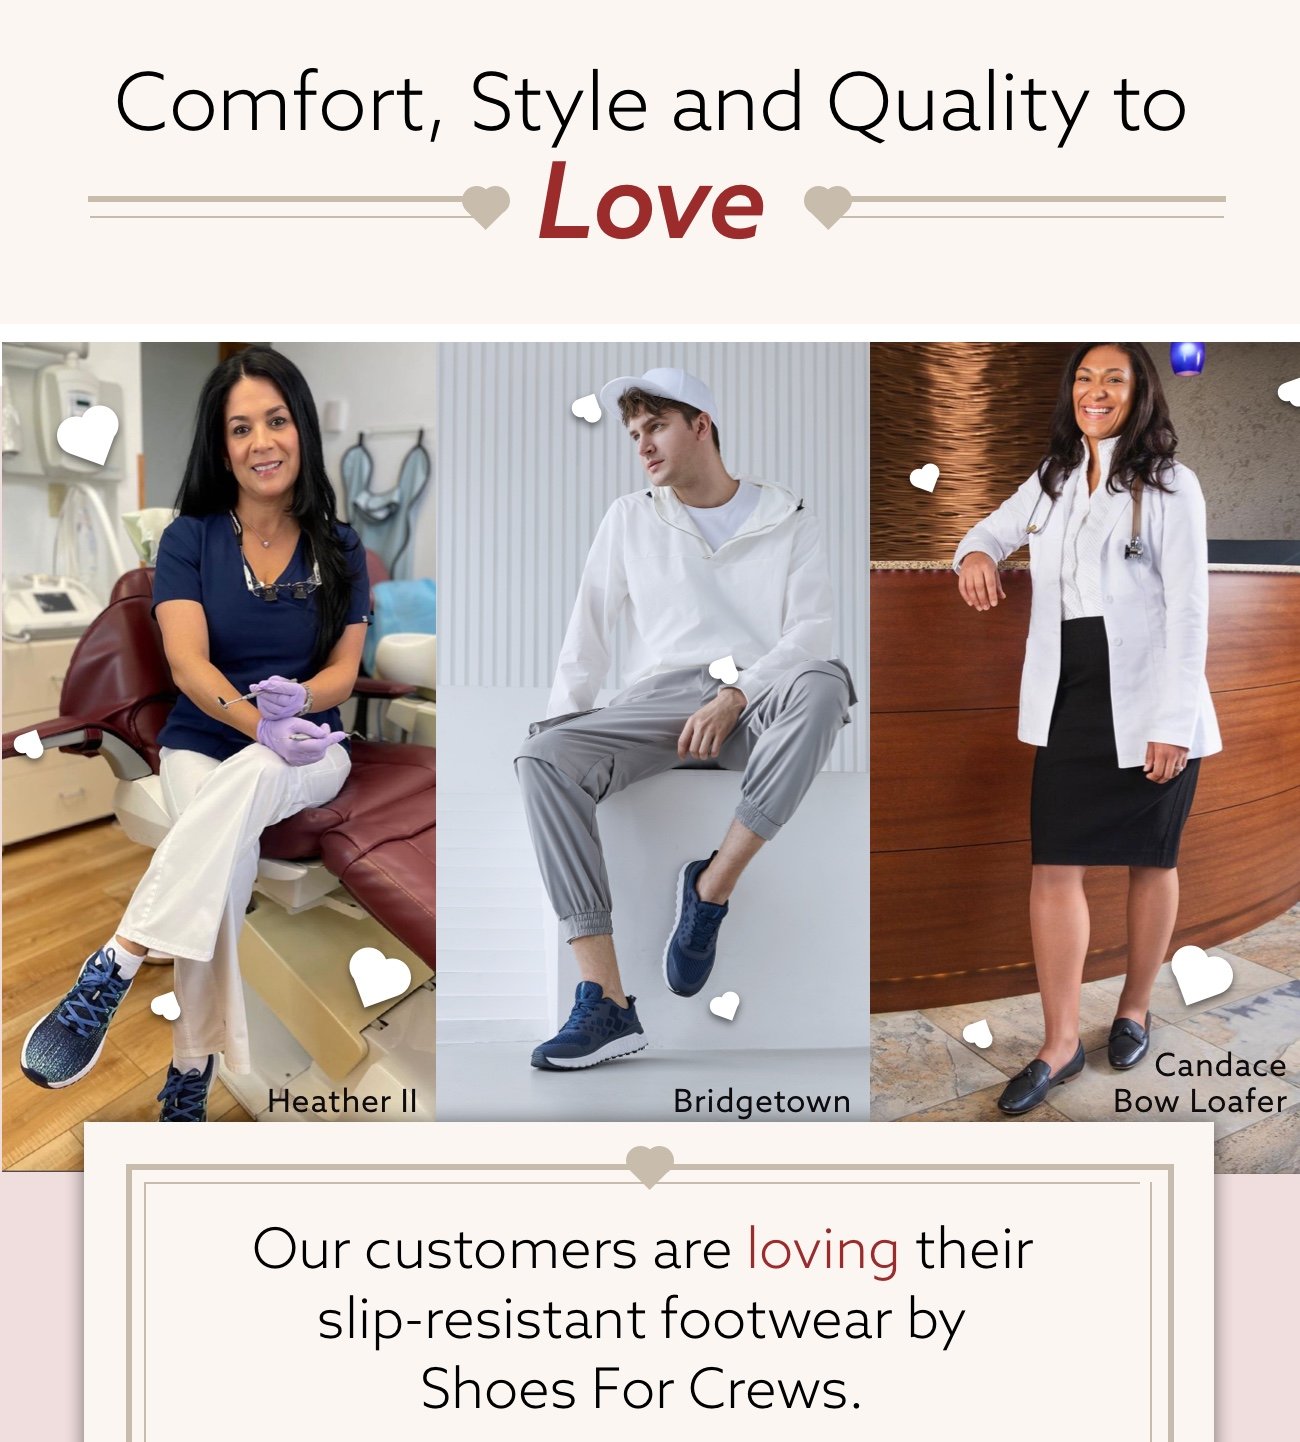 Comfort, Style and Qiality to Love.